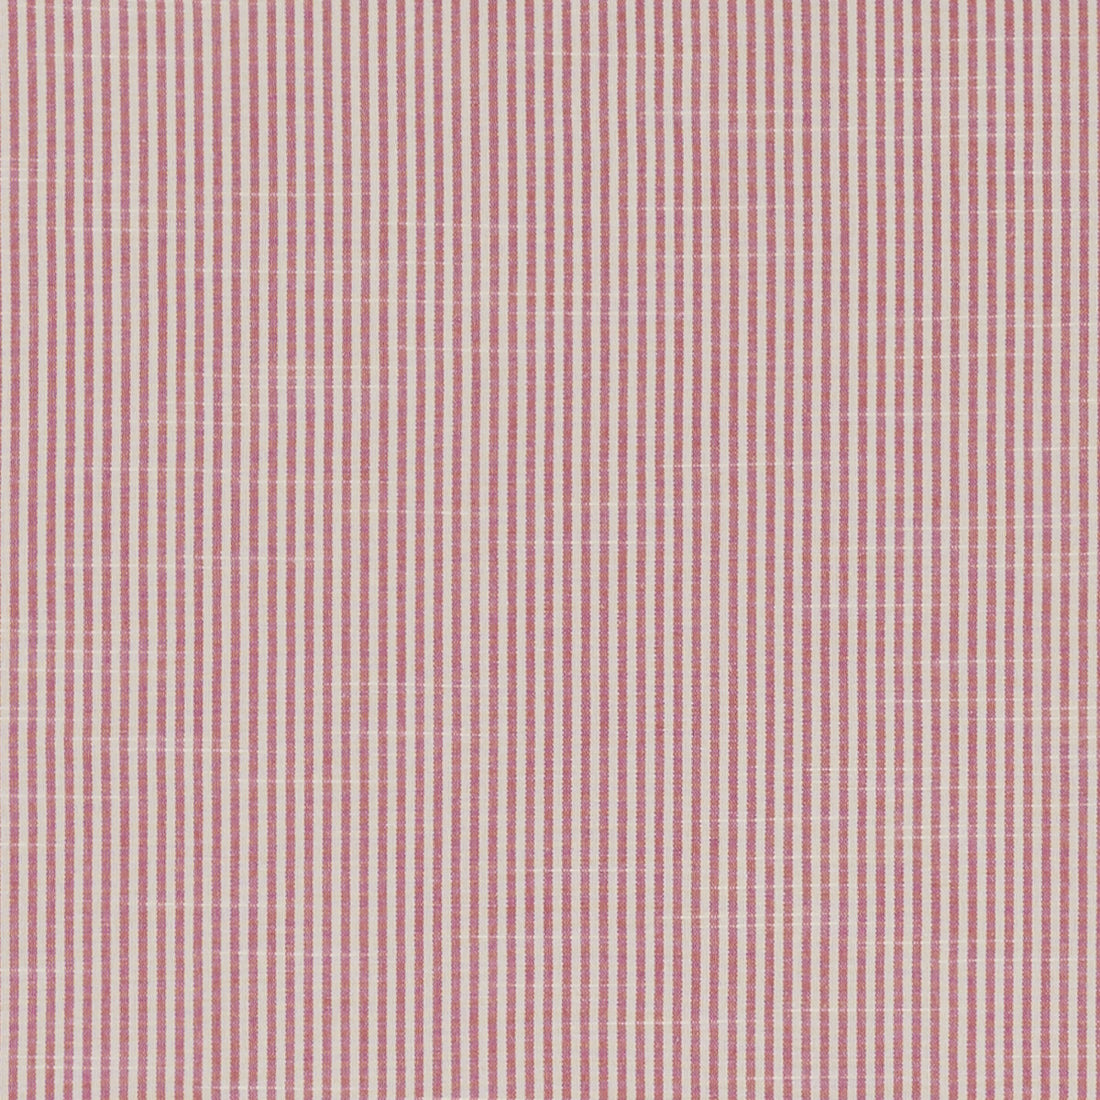 Bempton fabric in fuchsia color - pattern F1307/04.CAC.0 - by Clarke And Clarke in the Bempton By Studio G For C&amp;C collection